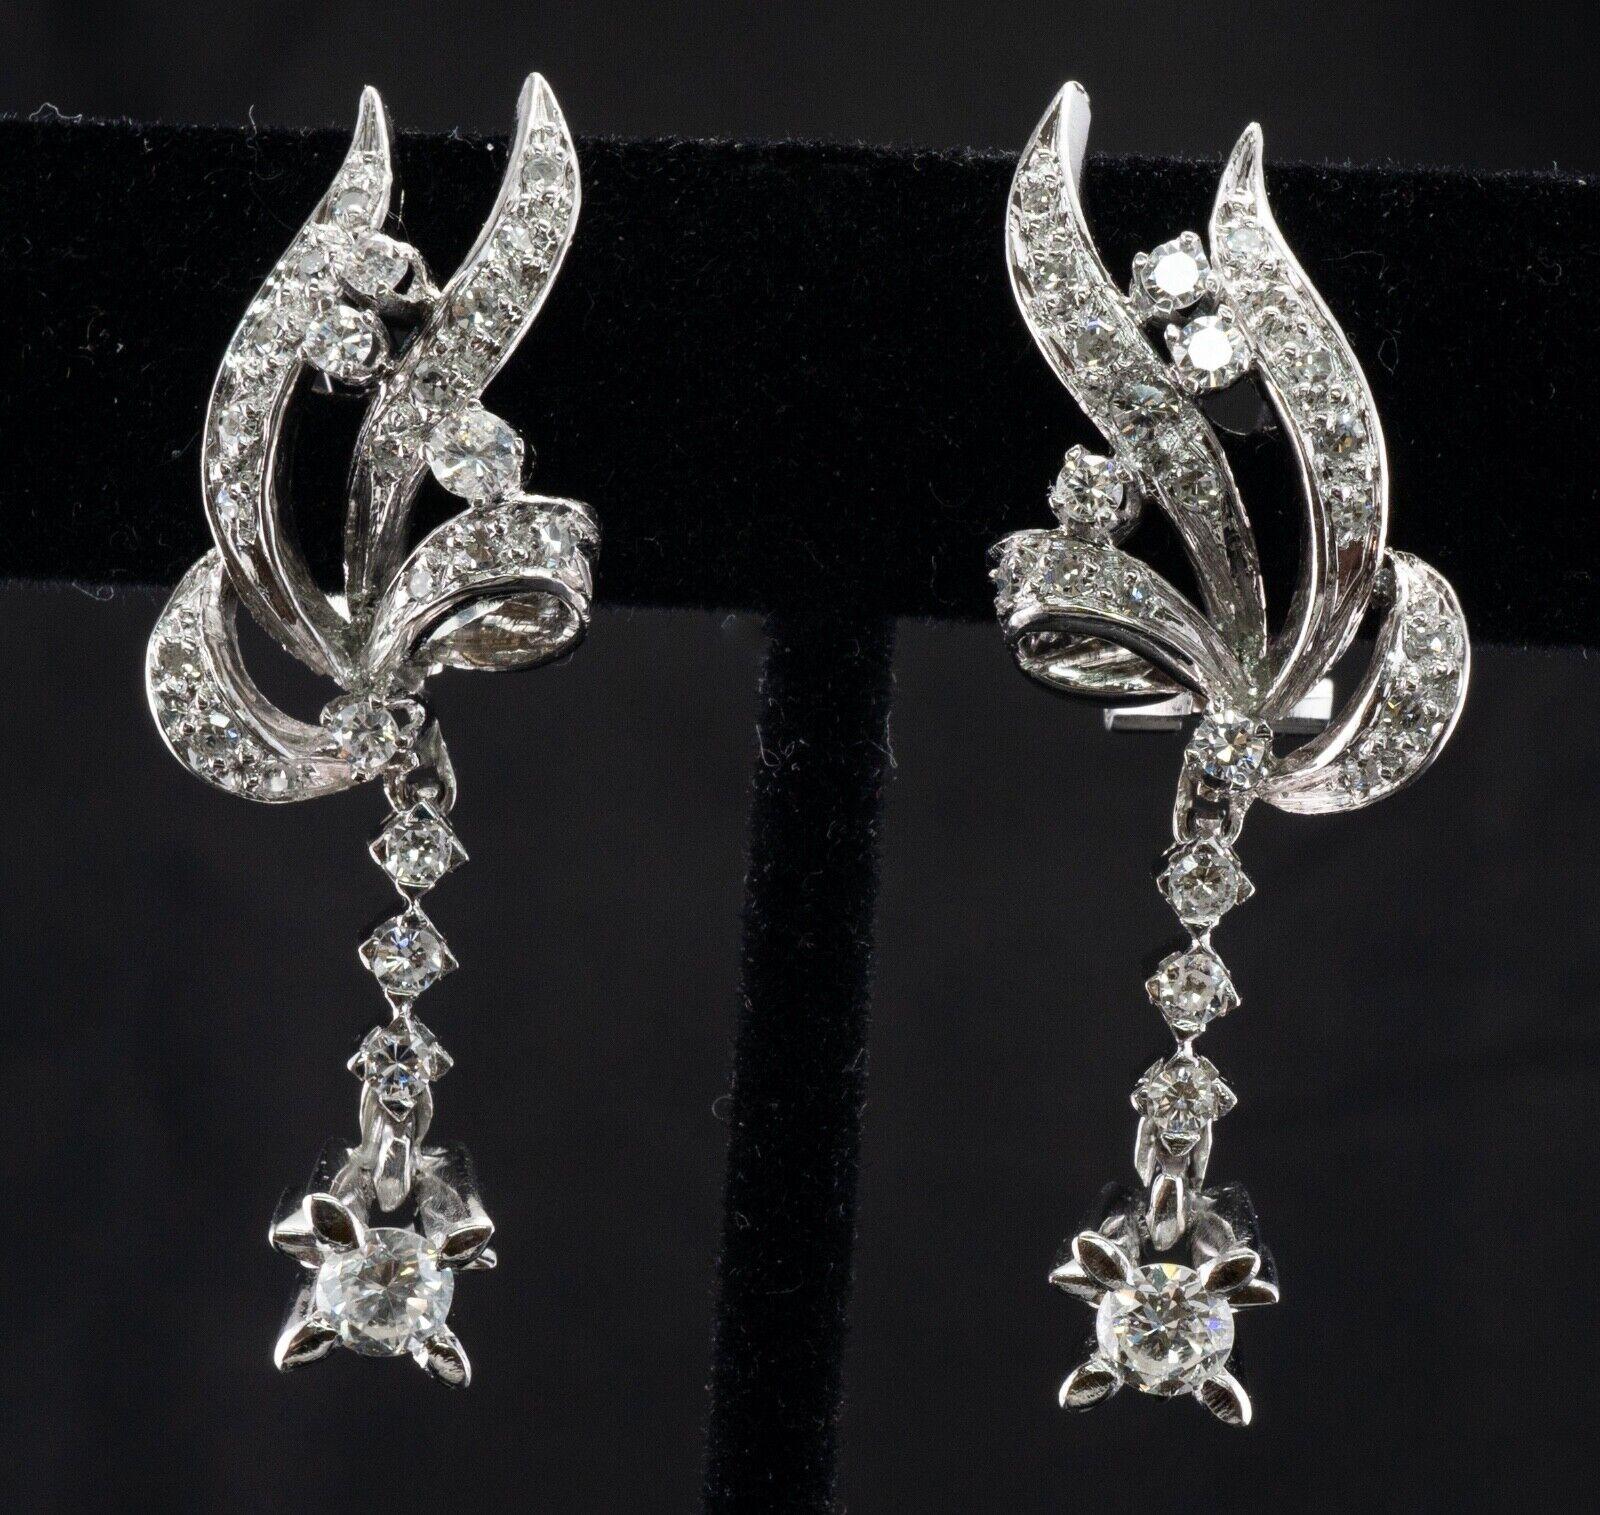 These gorgeous vintage earrings are crafted in solid 18K White Gold and set with natural diamonds. The bigger diamond on the bottom is .25 carat (VS2 clarity, H color). Seven diamonds total .35 carat (VS2 clarity, H color). And sixteen single cut